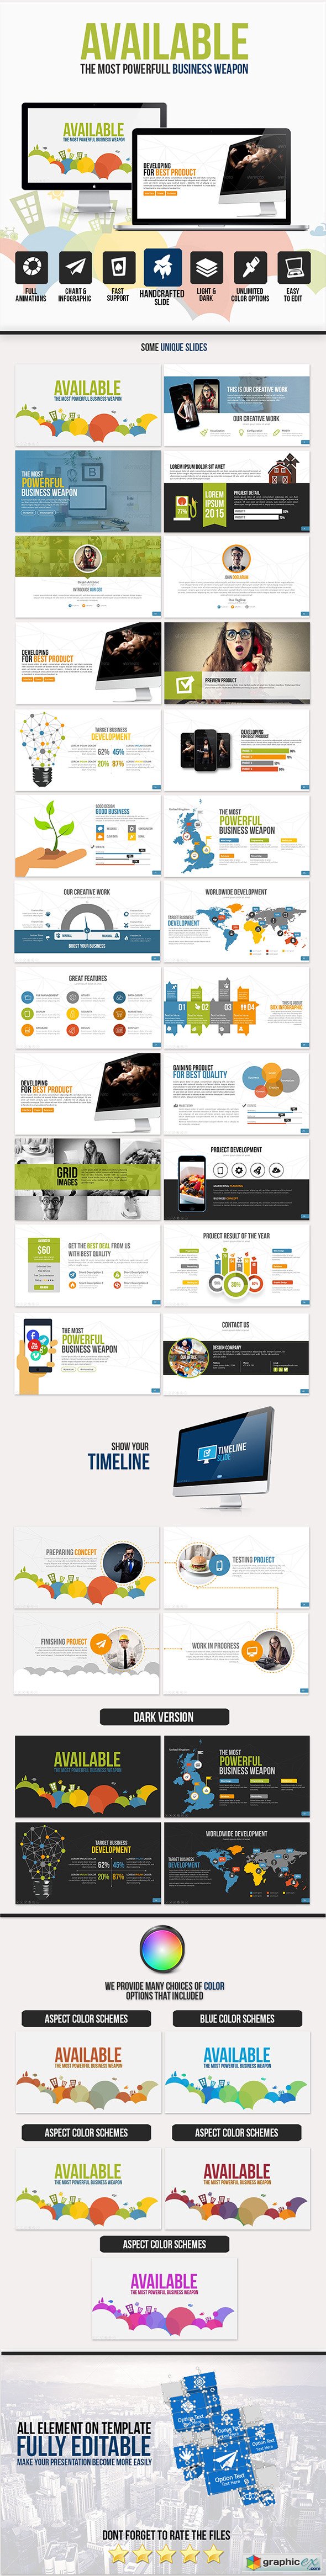 Available PowerPoint Template